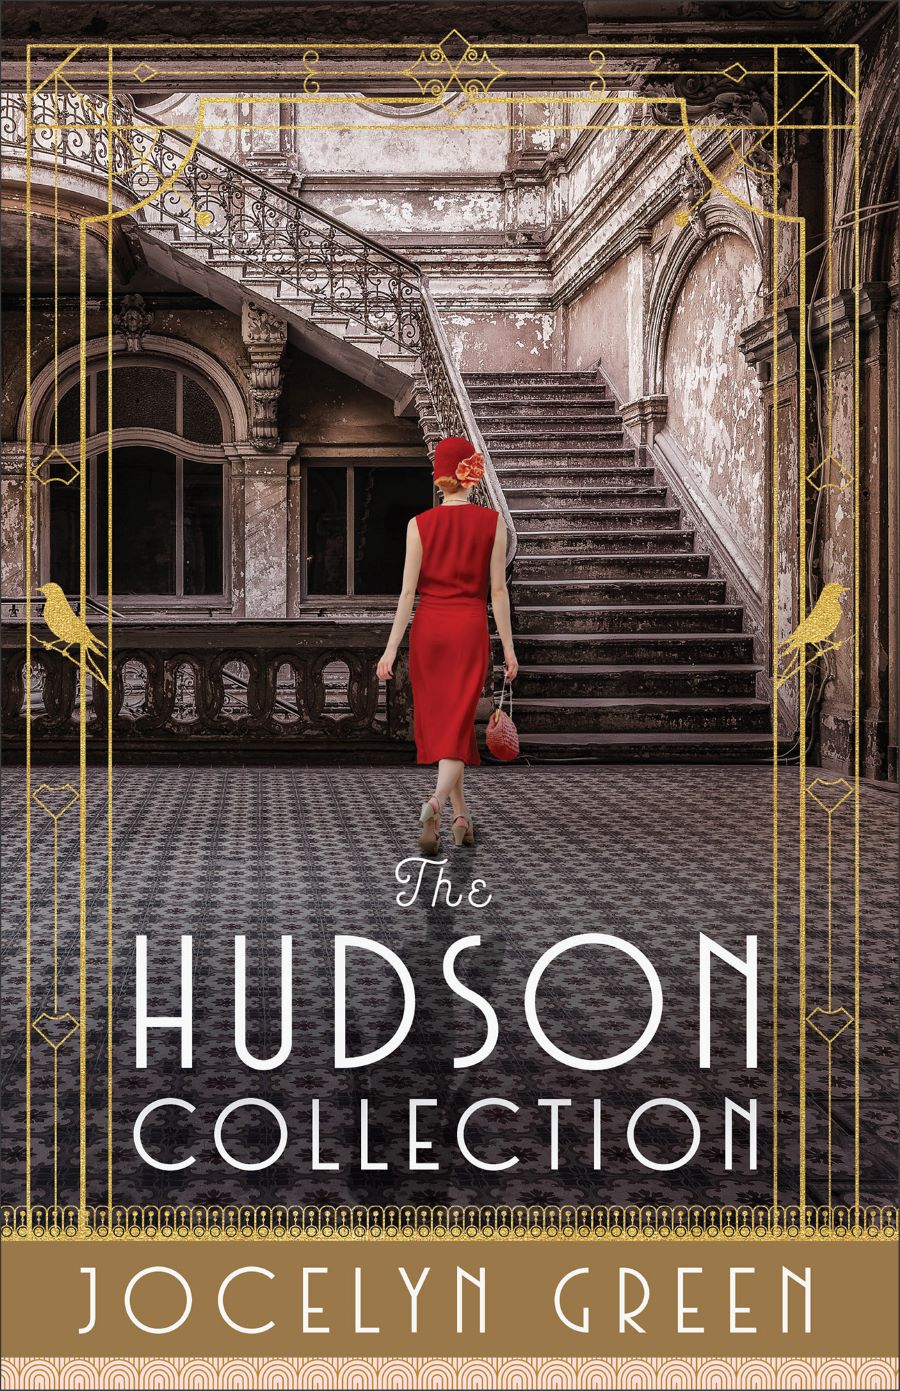 Front cover of The Hudson Collection by Jocelyn Green.